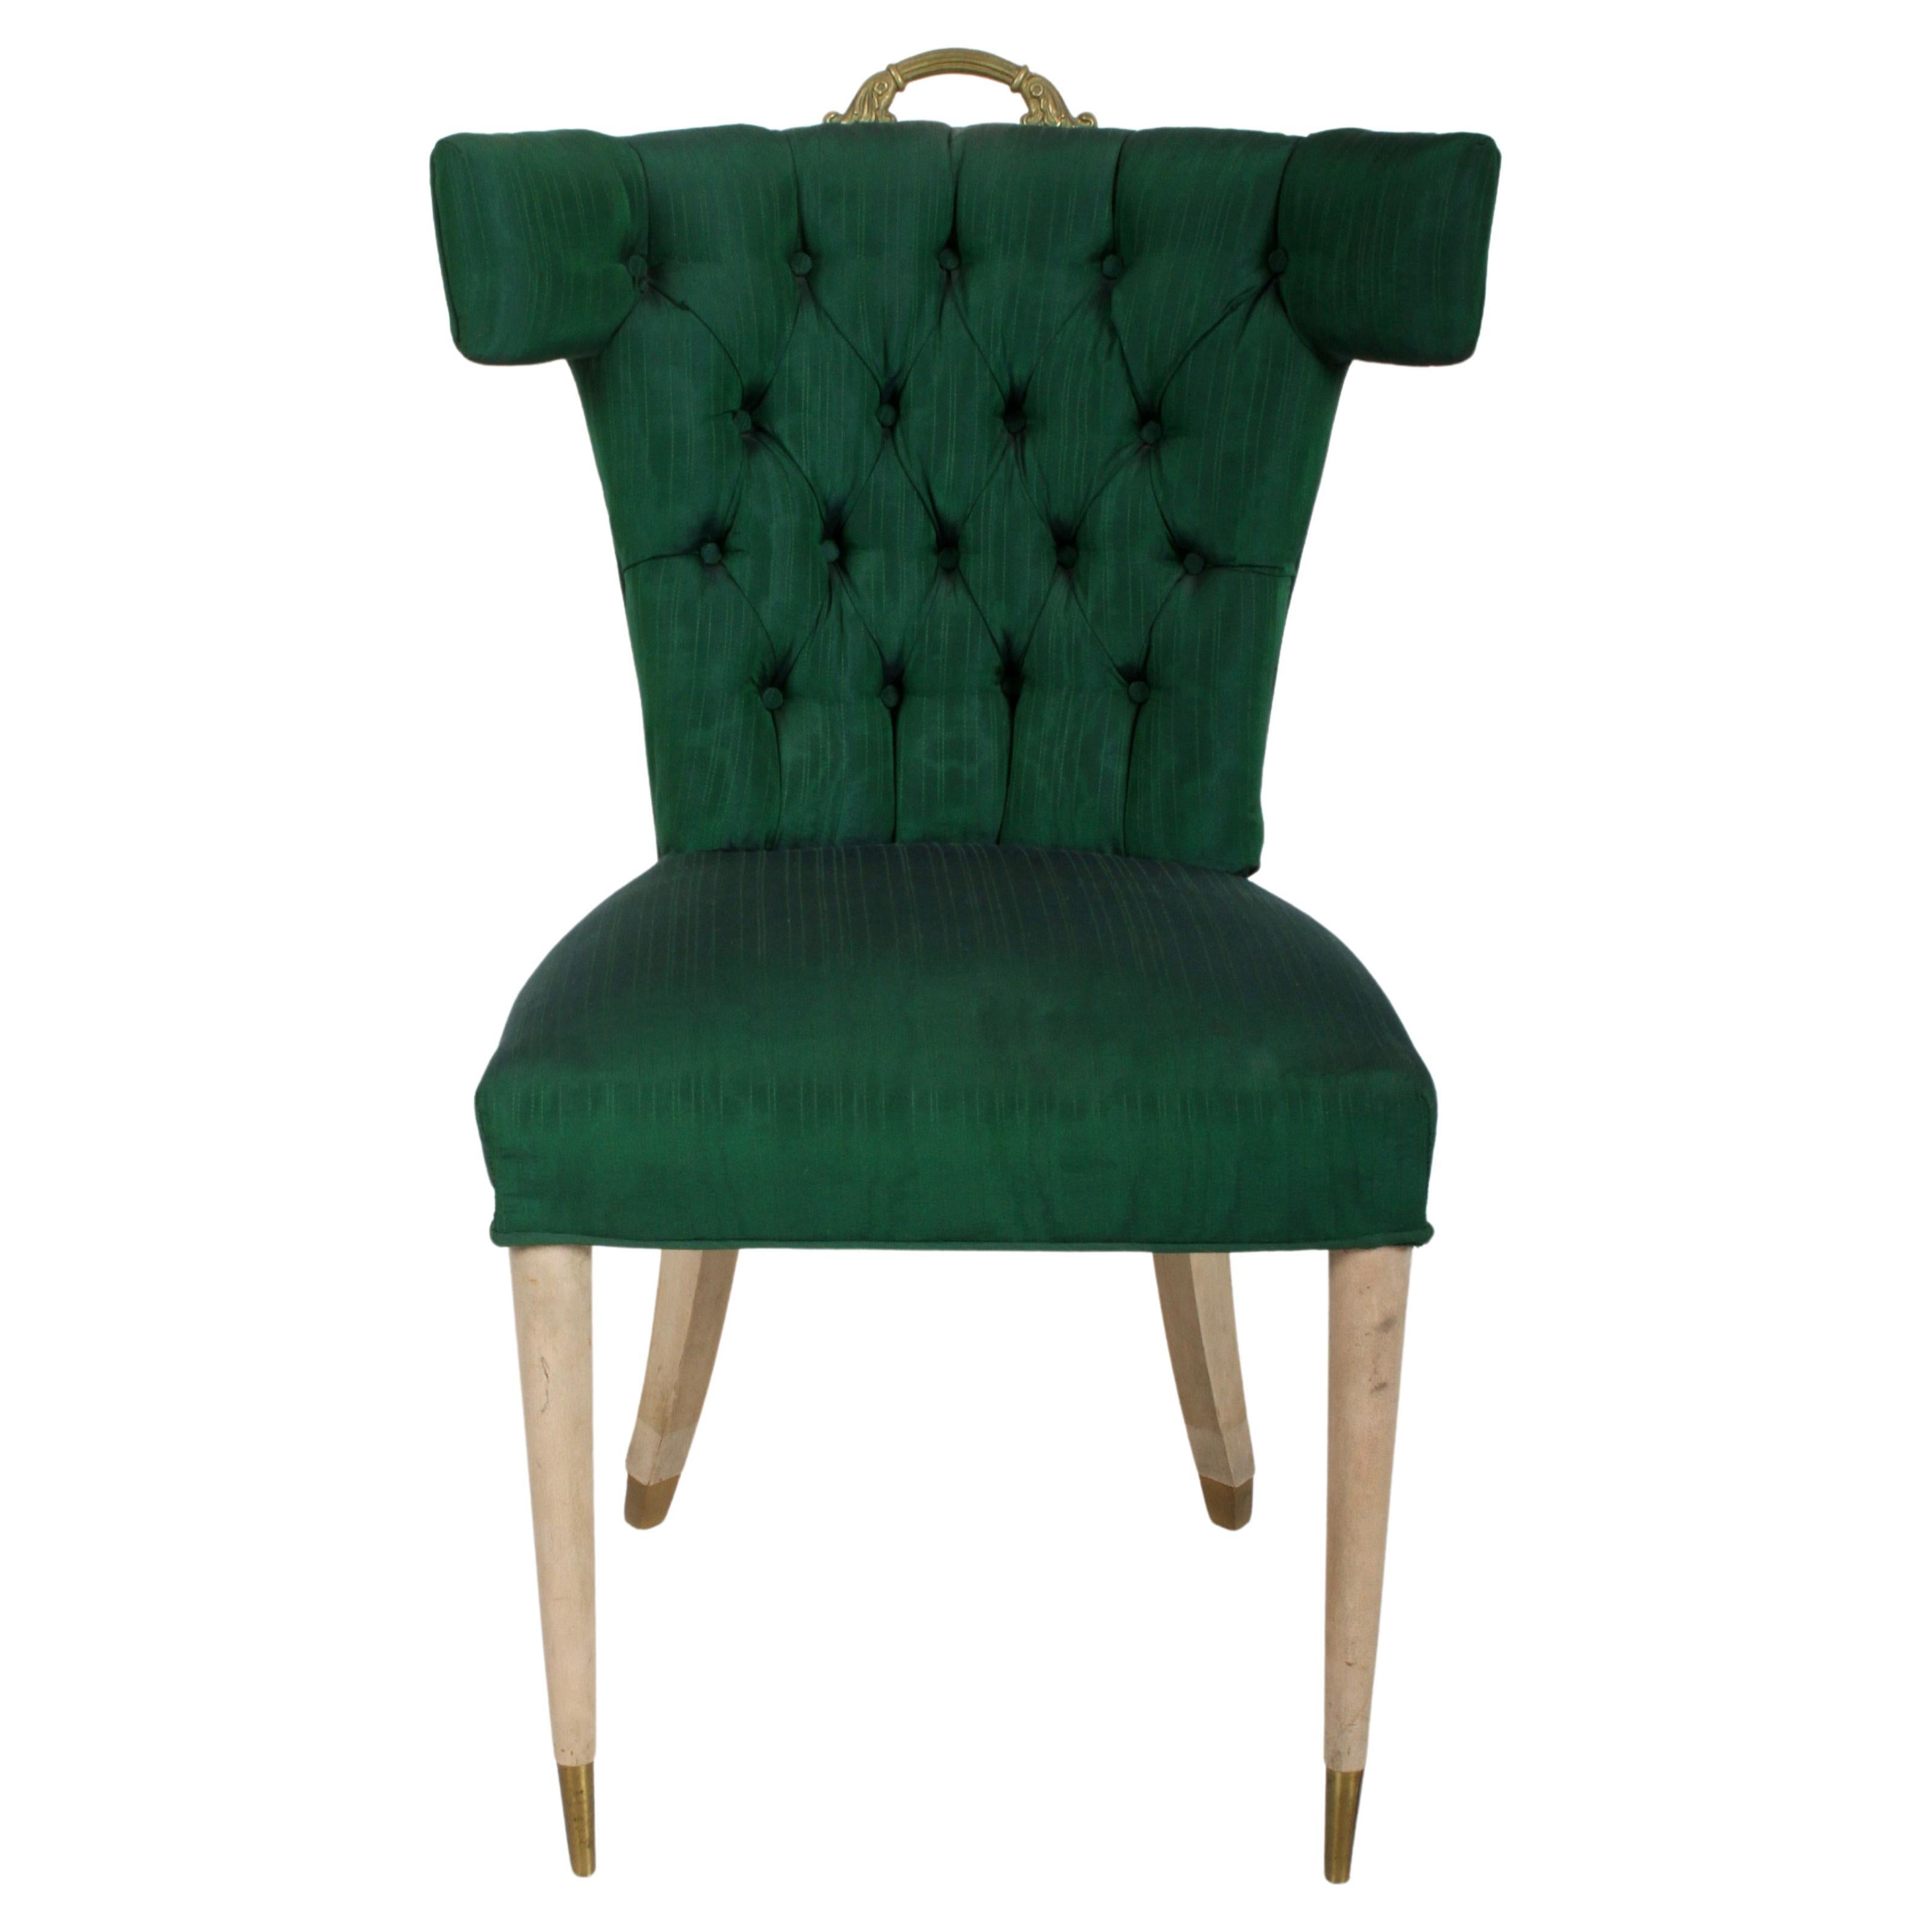 Satz von 6 1940s Hollywood Regency Tufted Curved Back Dining Chair Messing Griffe  im Angebot